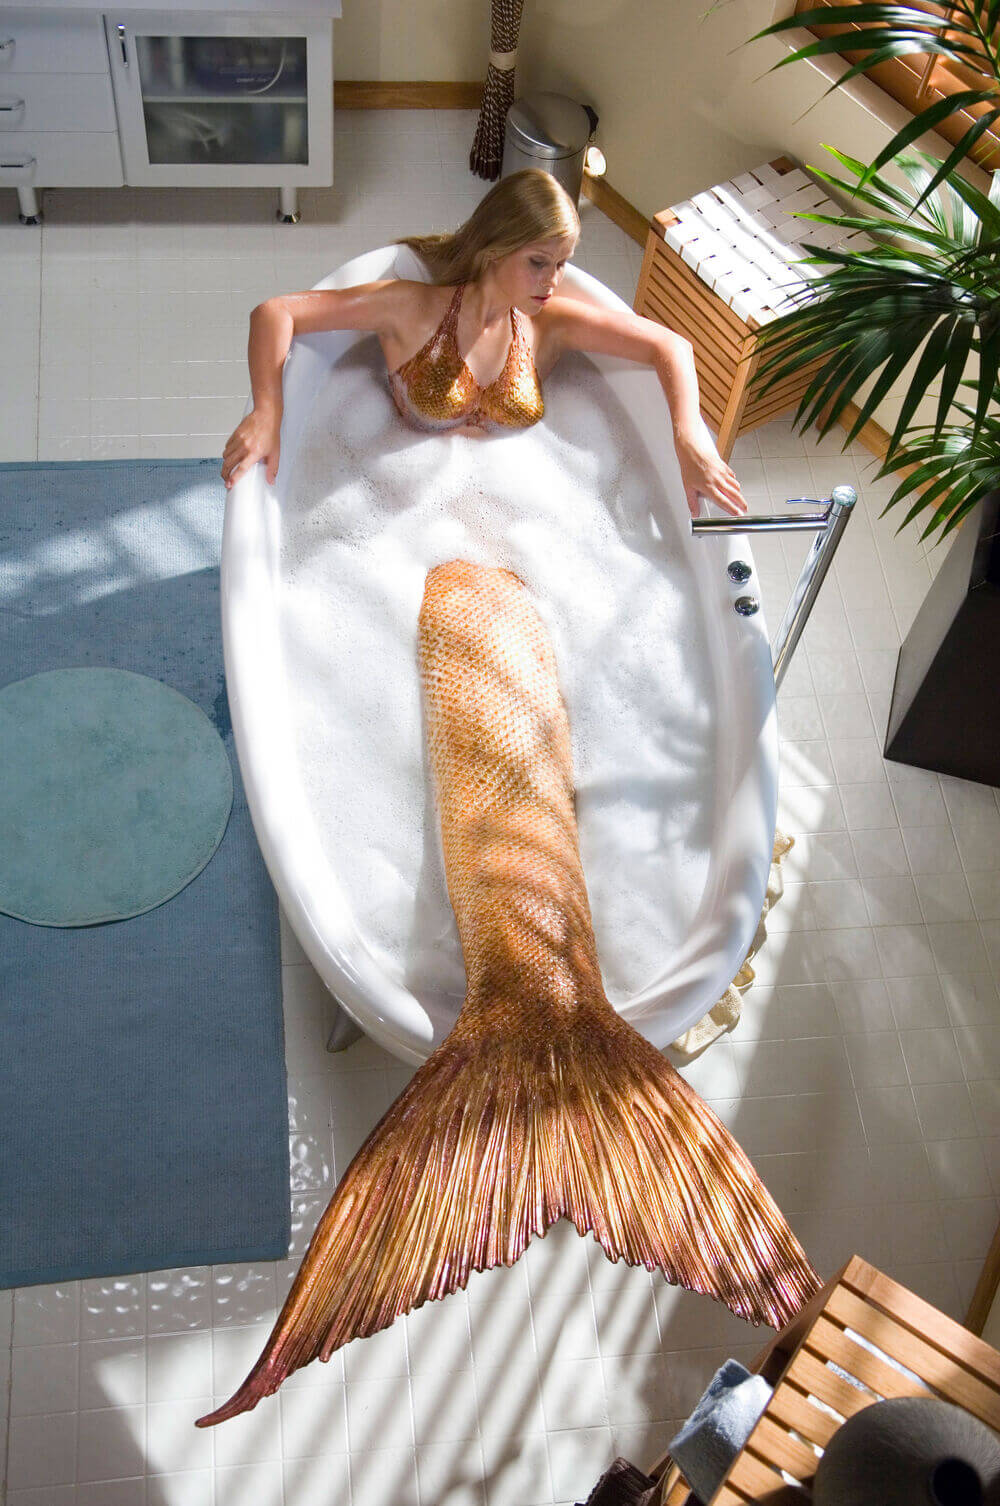 Emma in her mermaid form while in a bubble bath